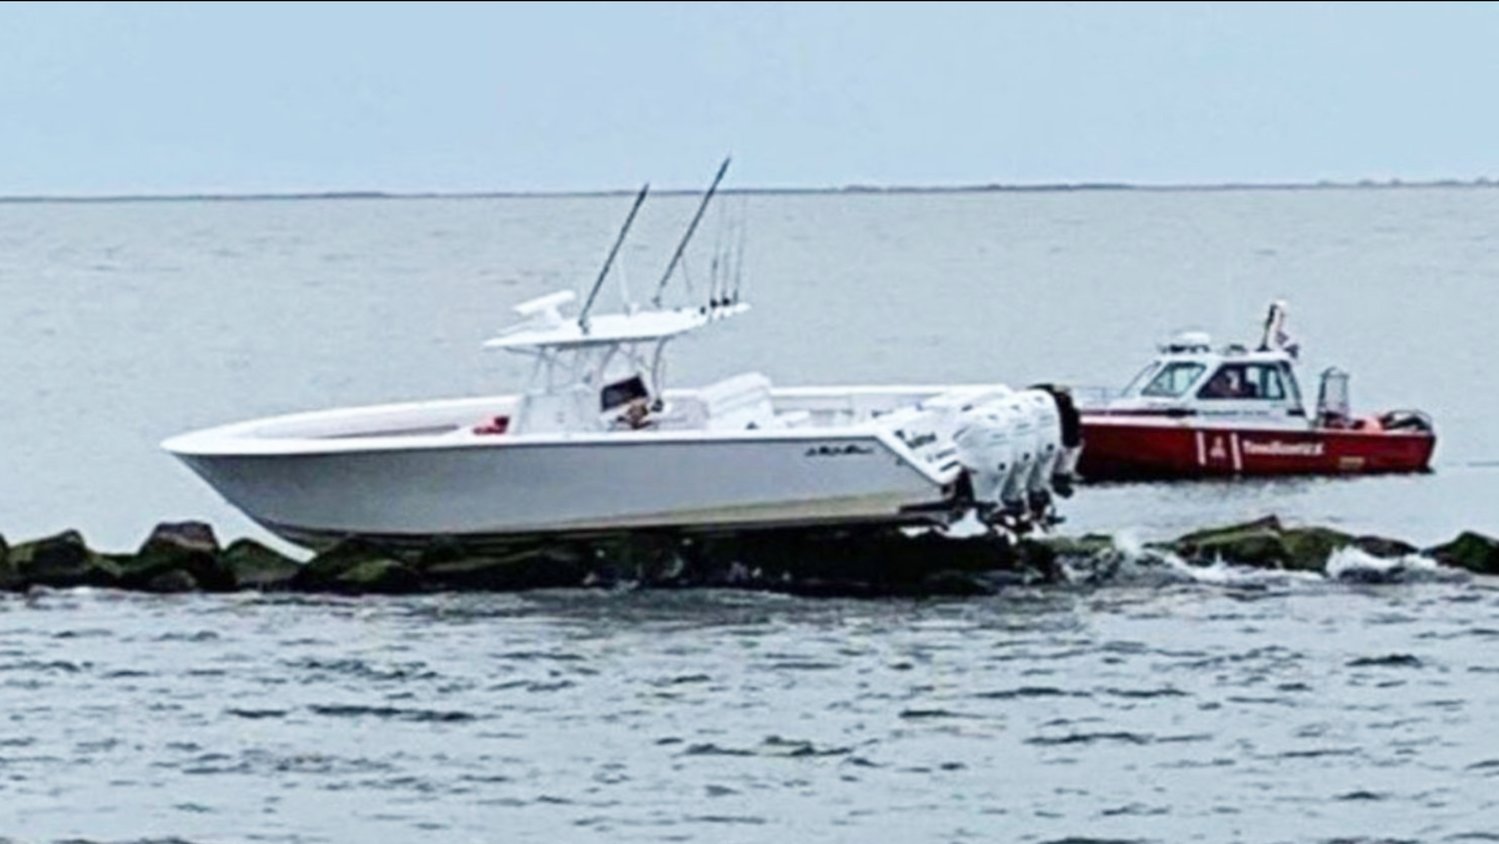 This 41-foot center console powerboat ran aground on the east jetty Saturday night.